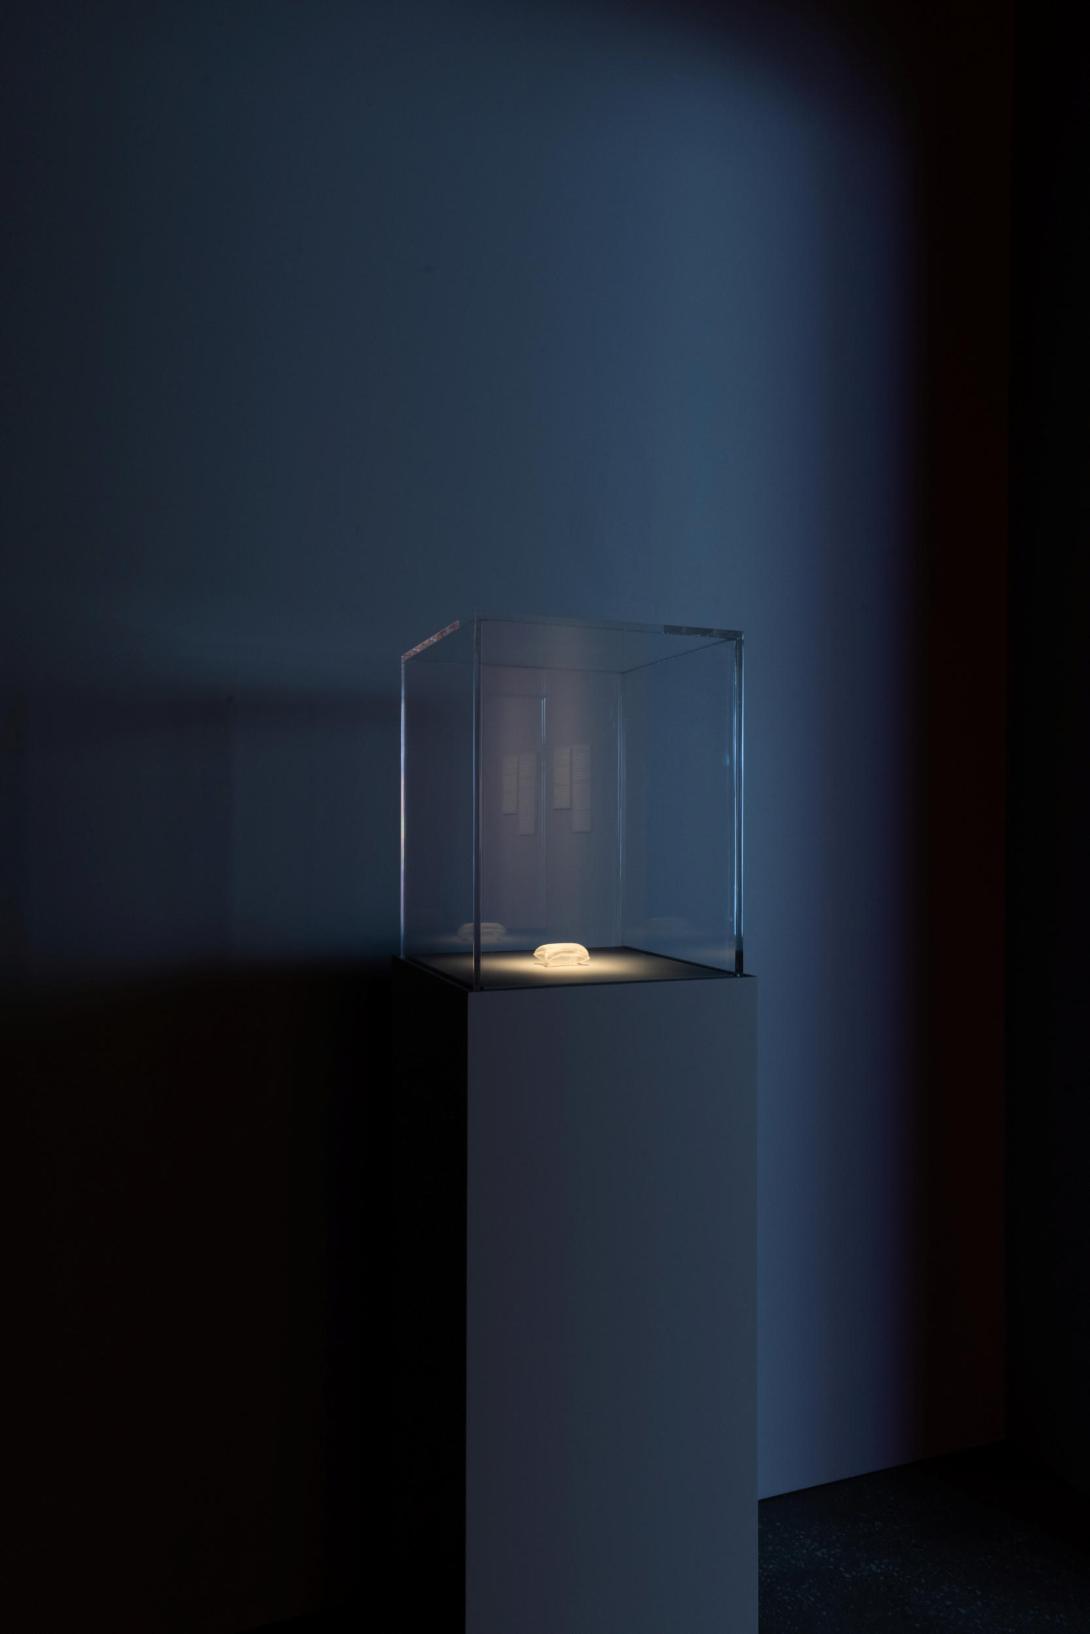 An installation view of a tiny pillow in a glass vitrine in a dark gallery space.